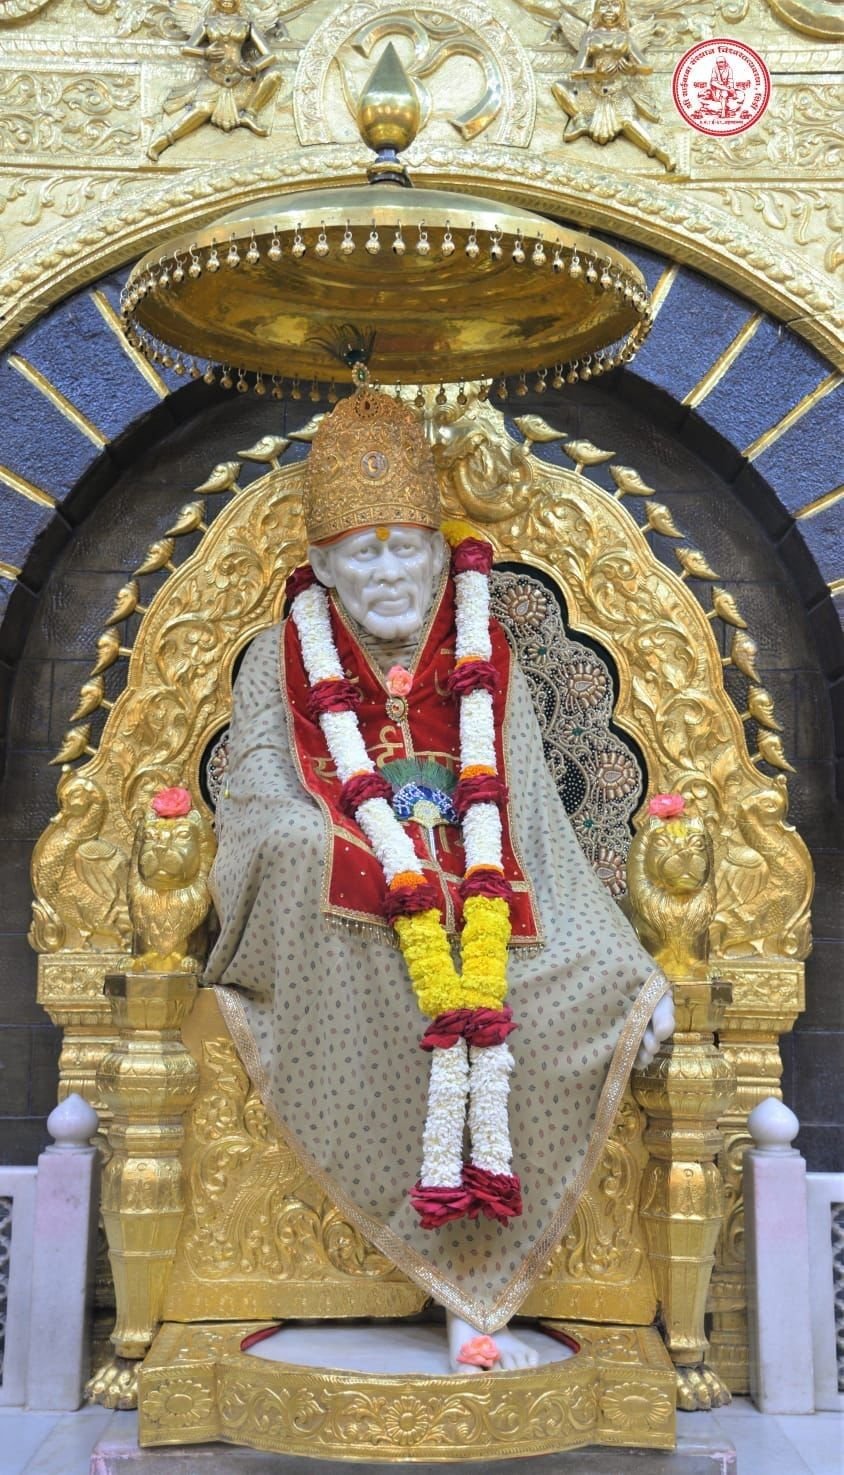 Flowere Full Images For In HD Rose Sai Baba